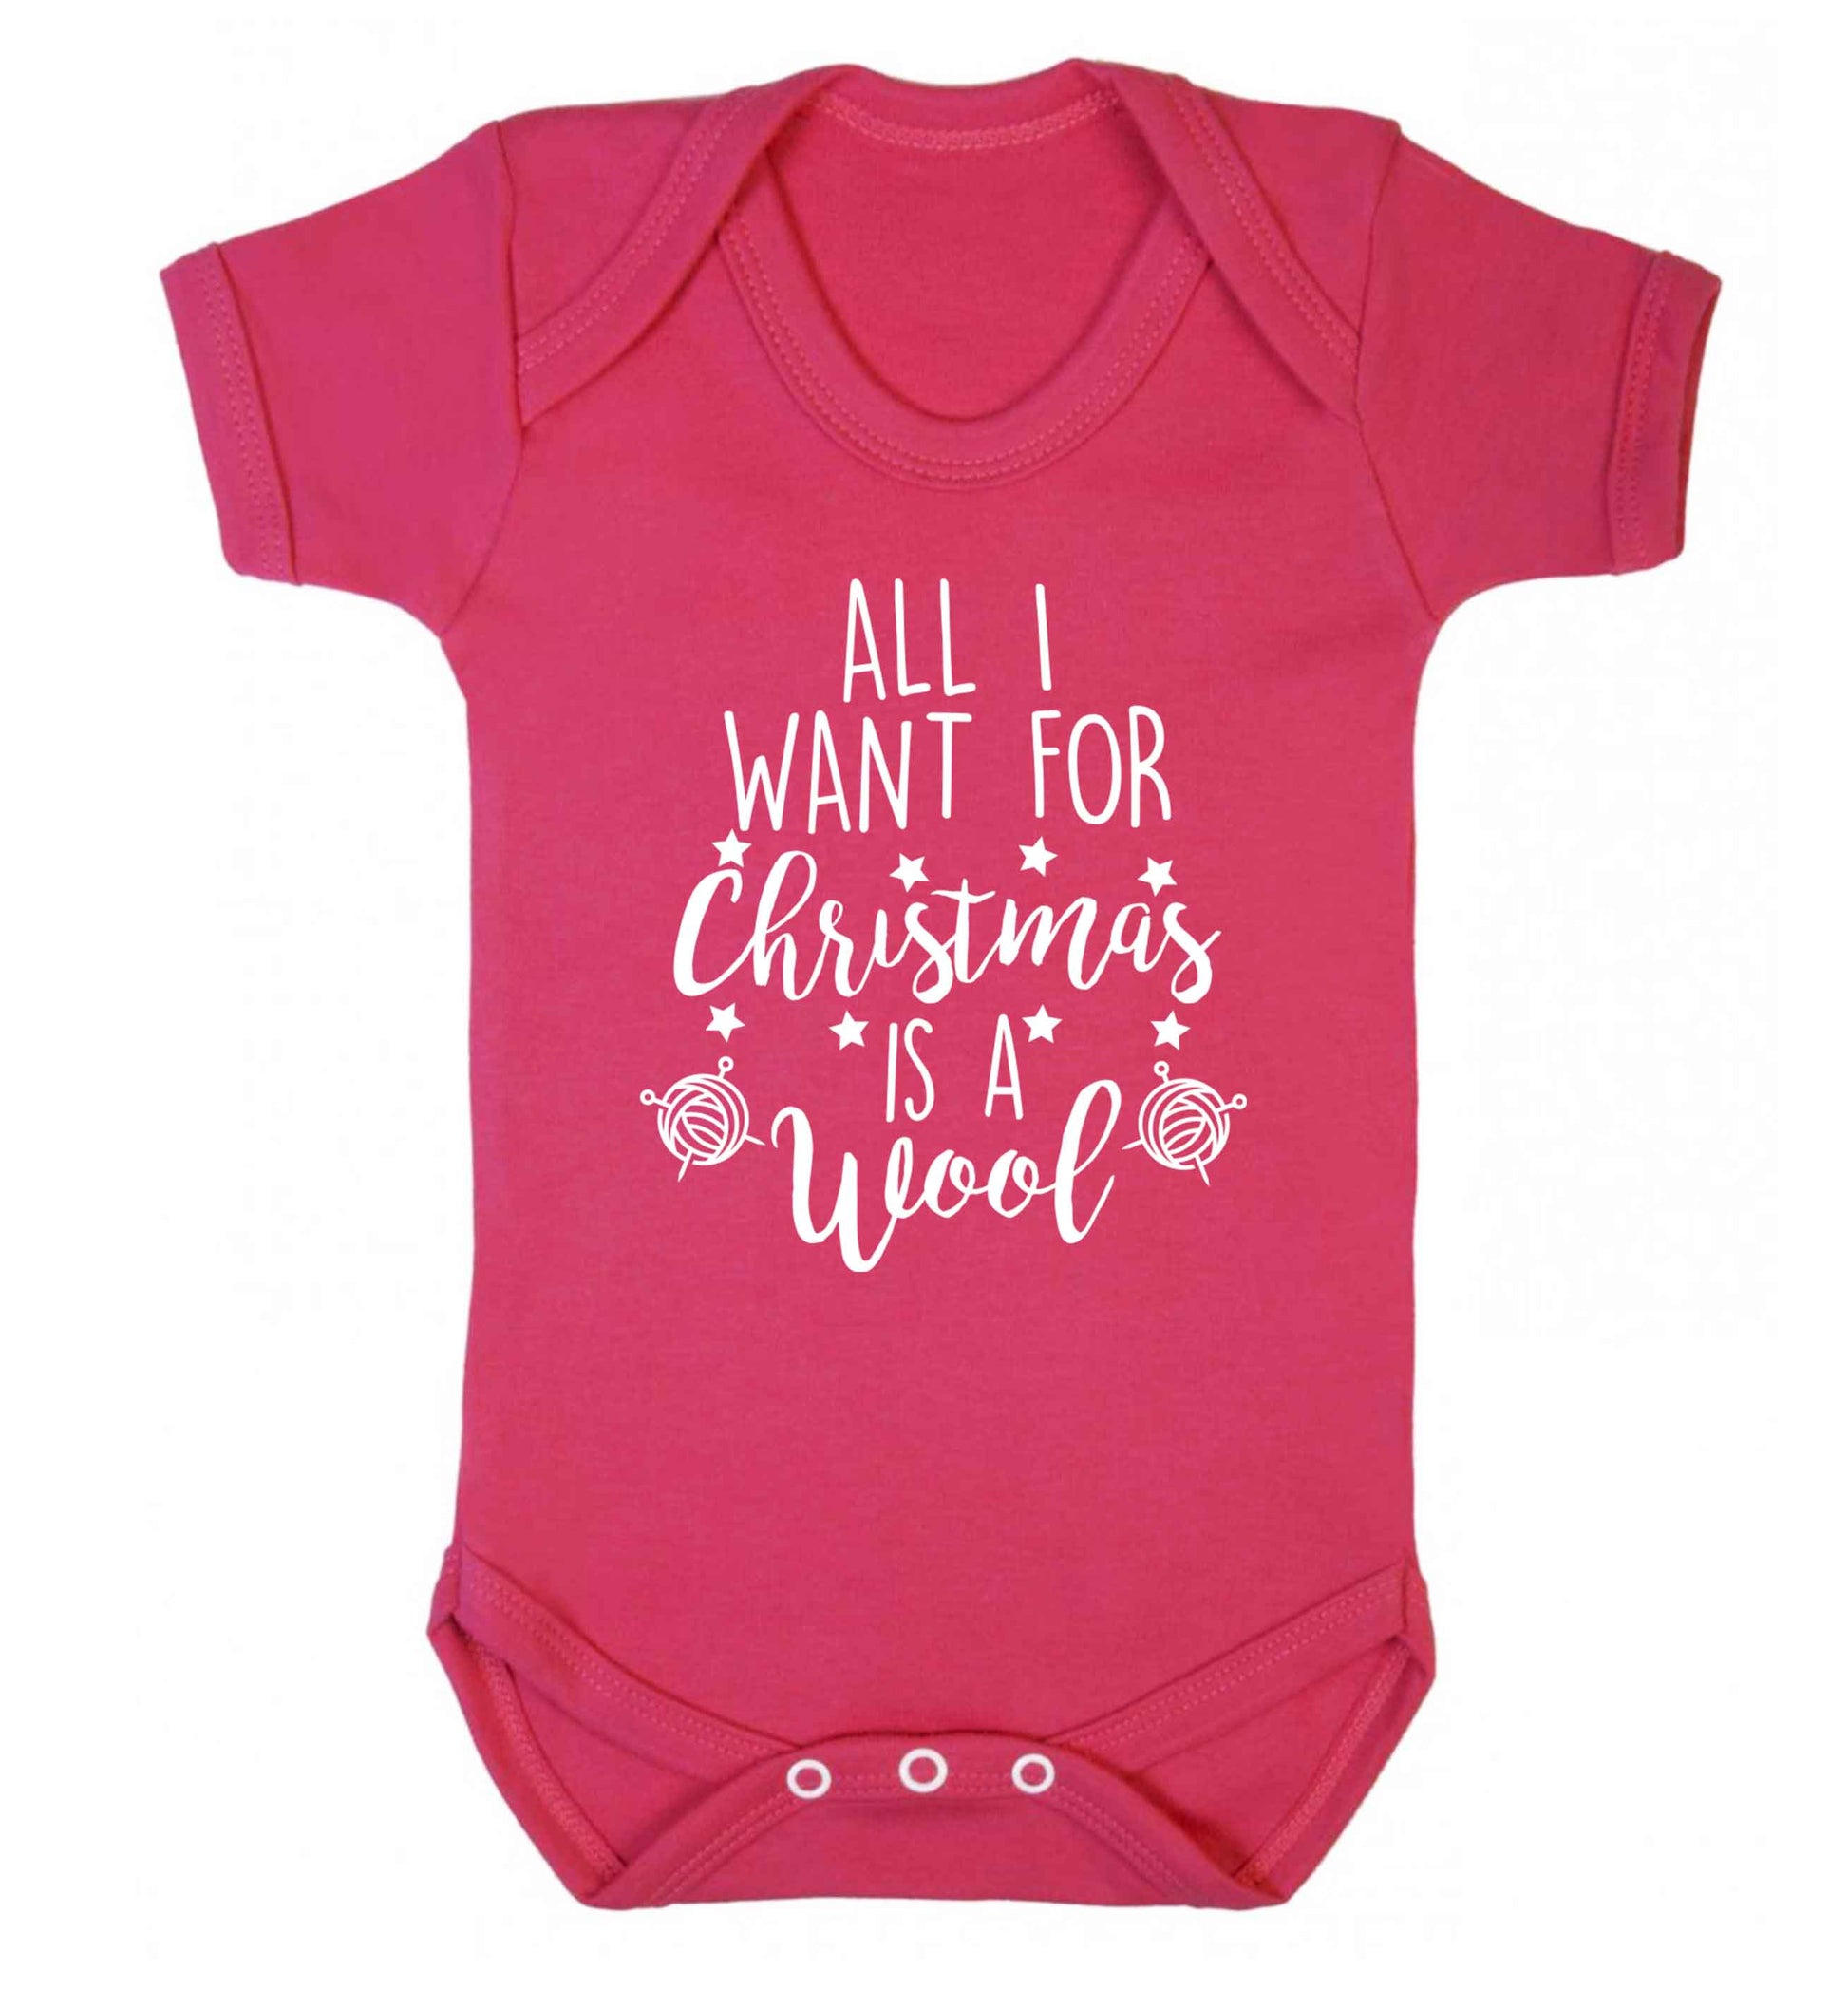 All I want for Christmas is wool! Baby Vest dark pink 18-24 months